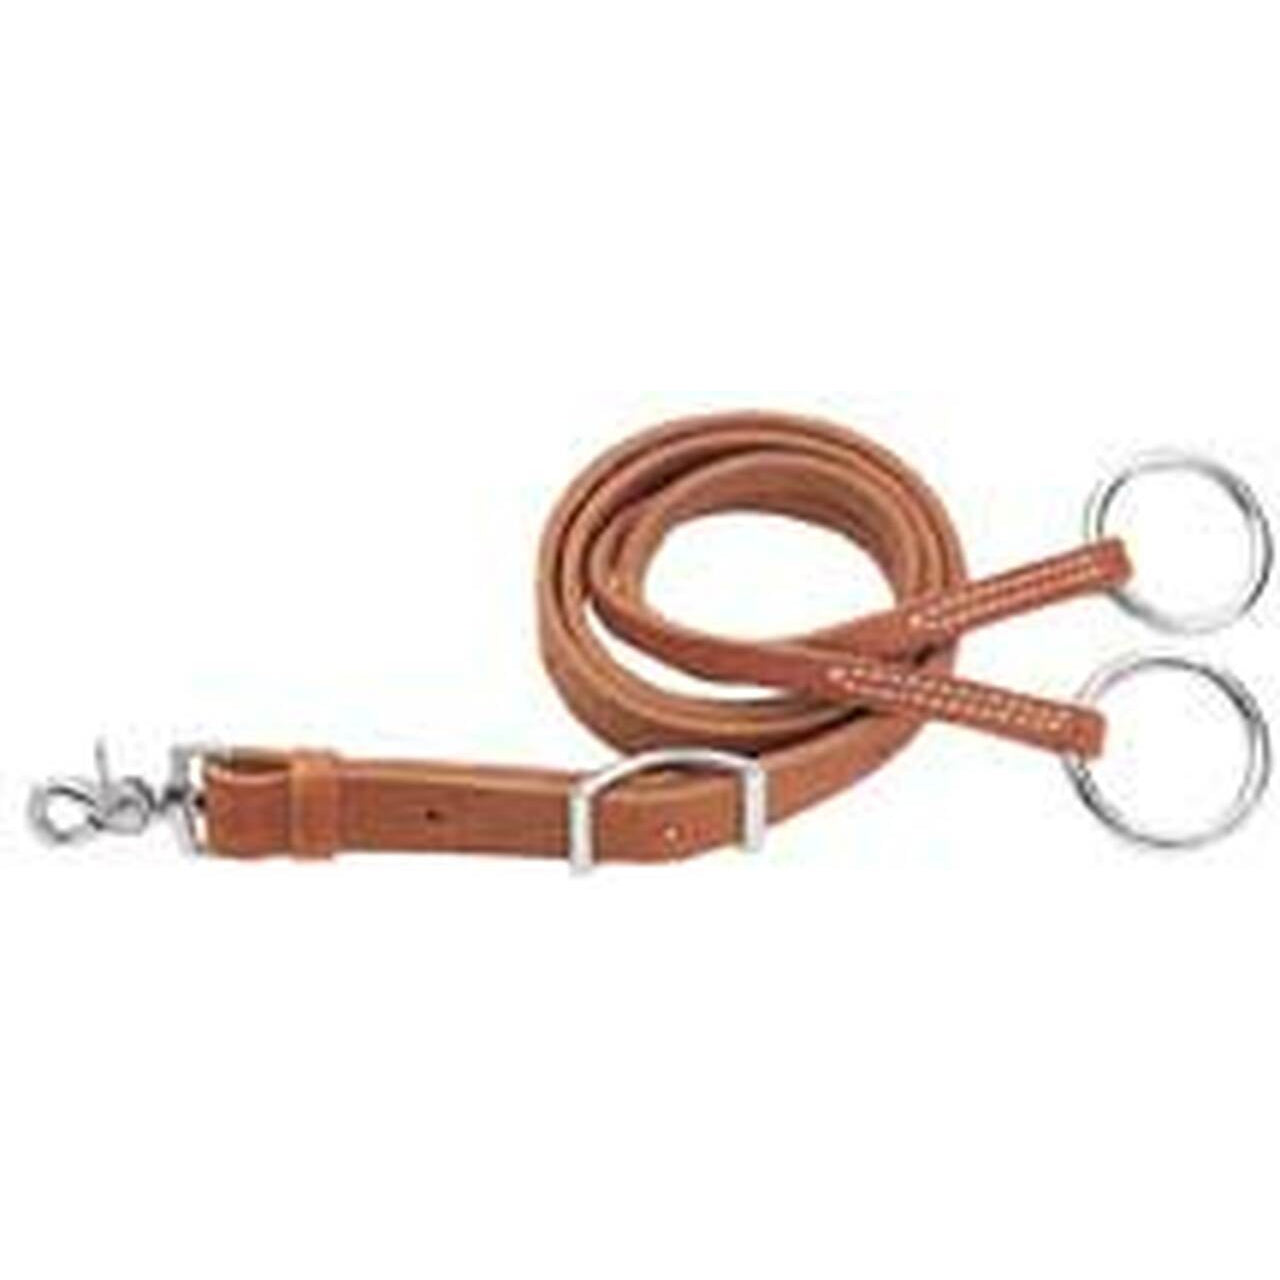 Weaver Leather Training Fork Girth Attachment 1" x 48" - Russet